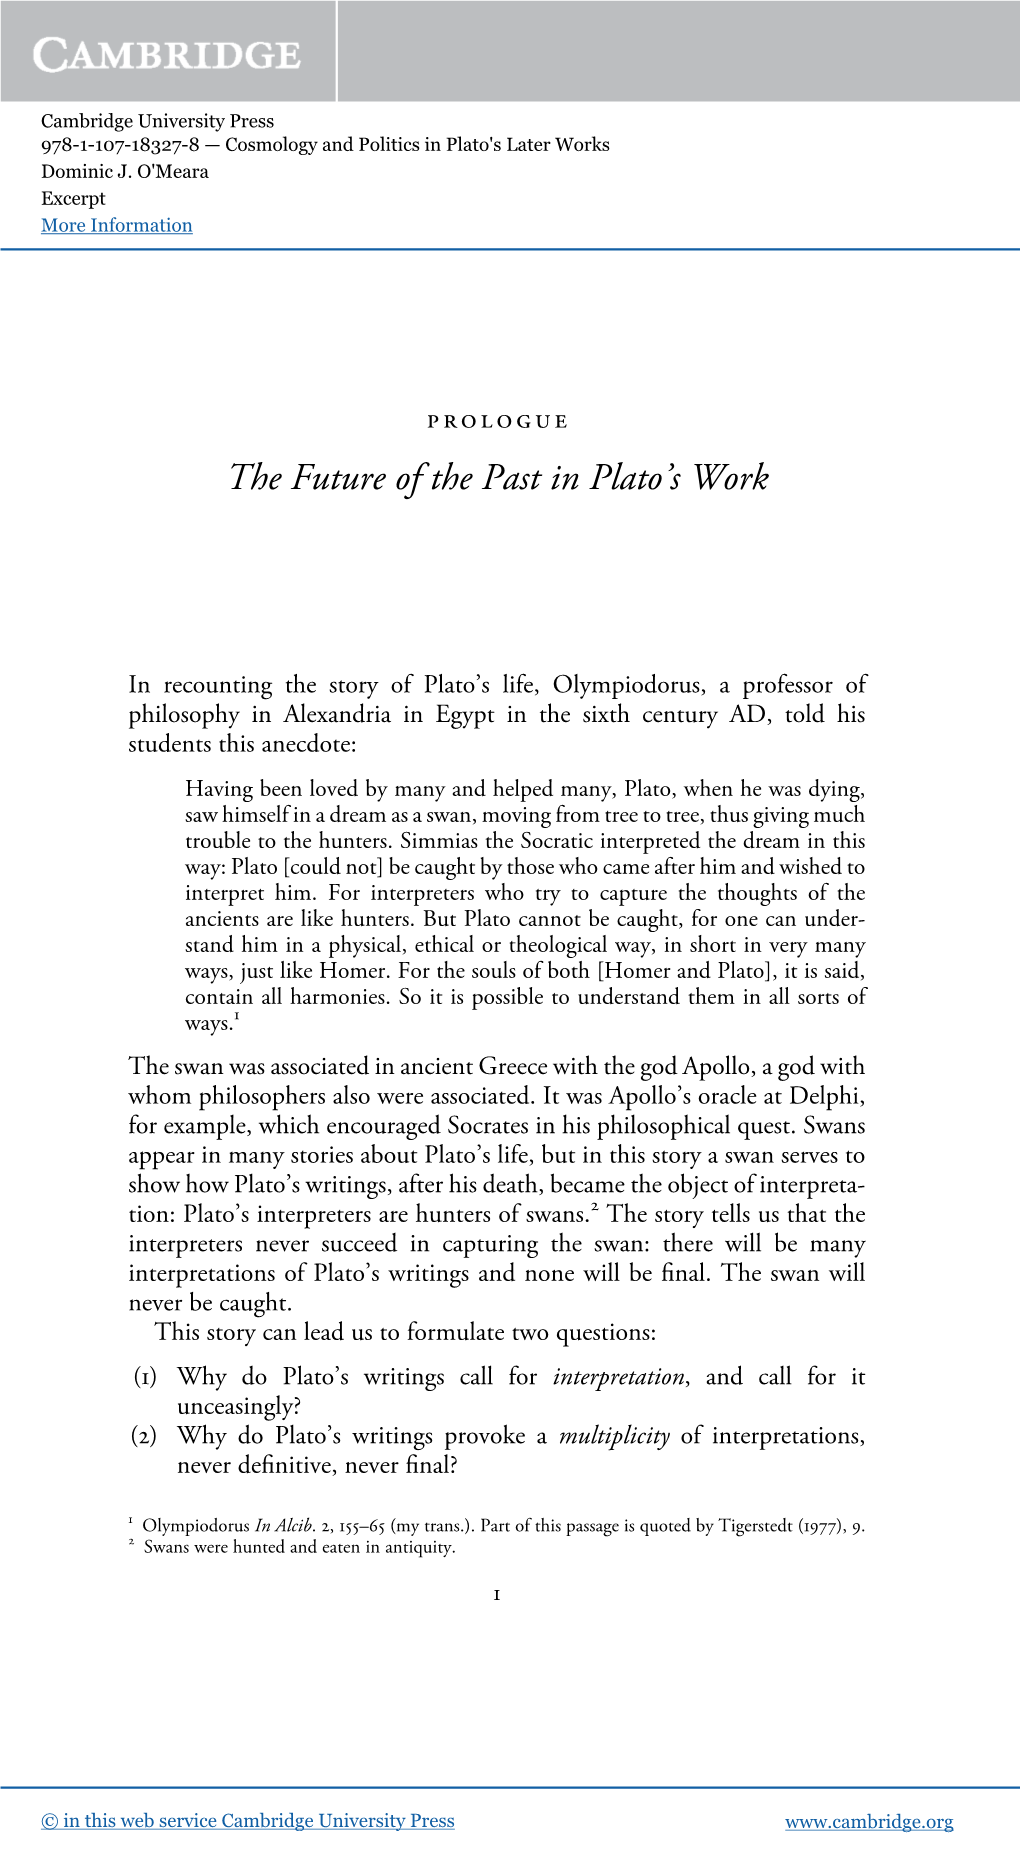 The Future of the Past in Plato's Work